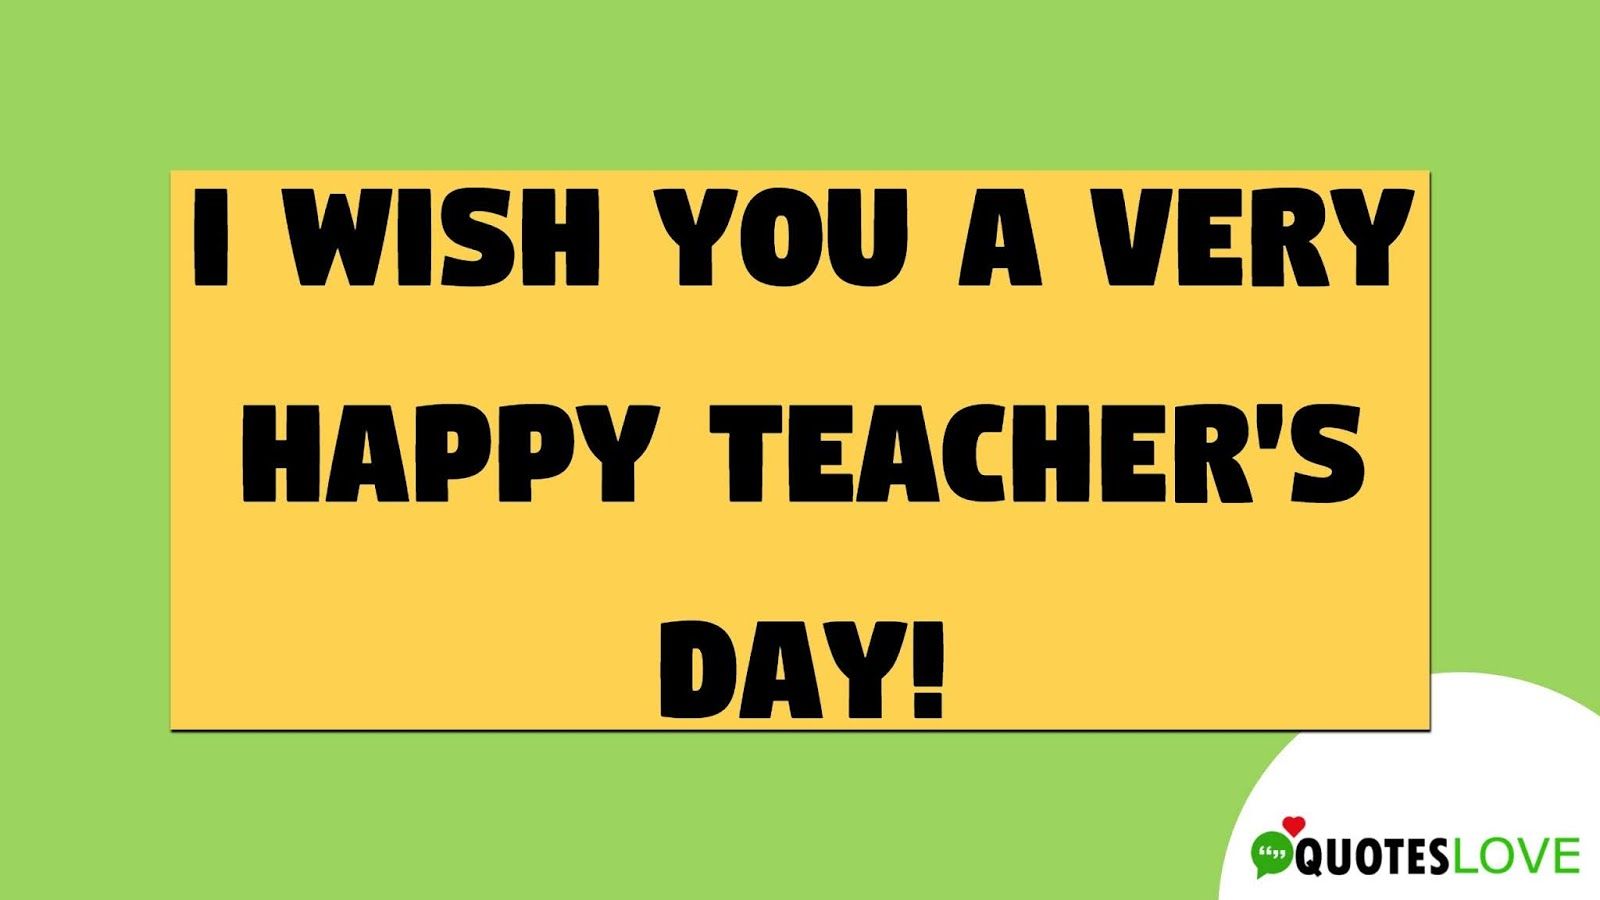 (New) Happy Teachers Day 2021: Quotes, Status, Wishes, Image and Messages